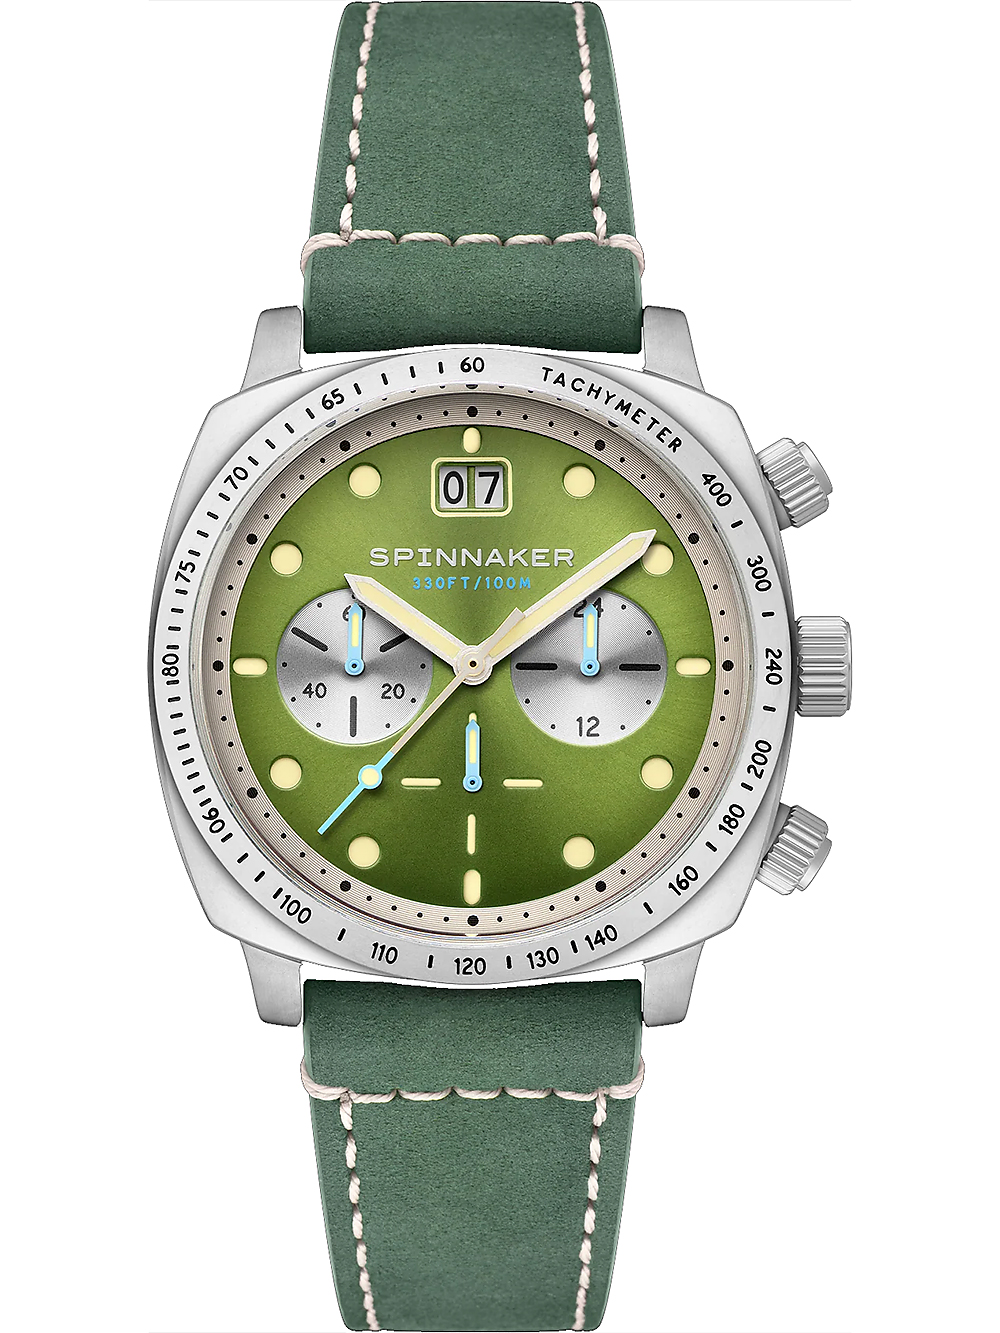 Spinnaker SP-5068-06 Mens Watch Hull Chronograph Shire Green 42mm 10ATM BY Spinnaker - Wristwatch available at DOYUF